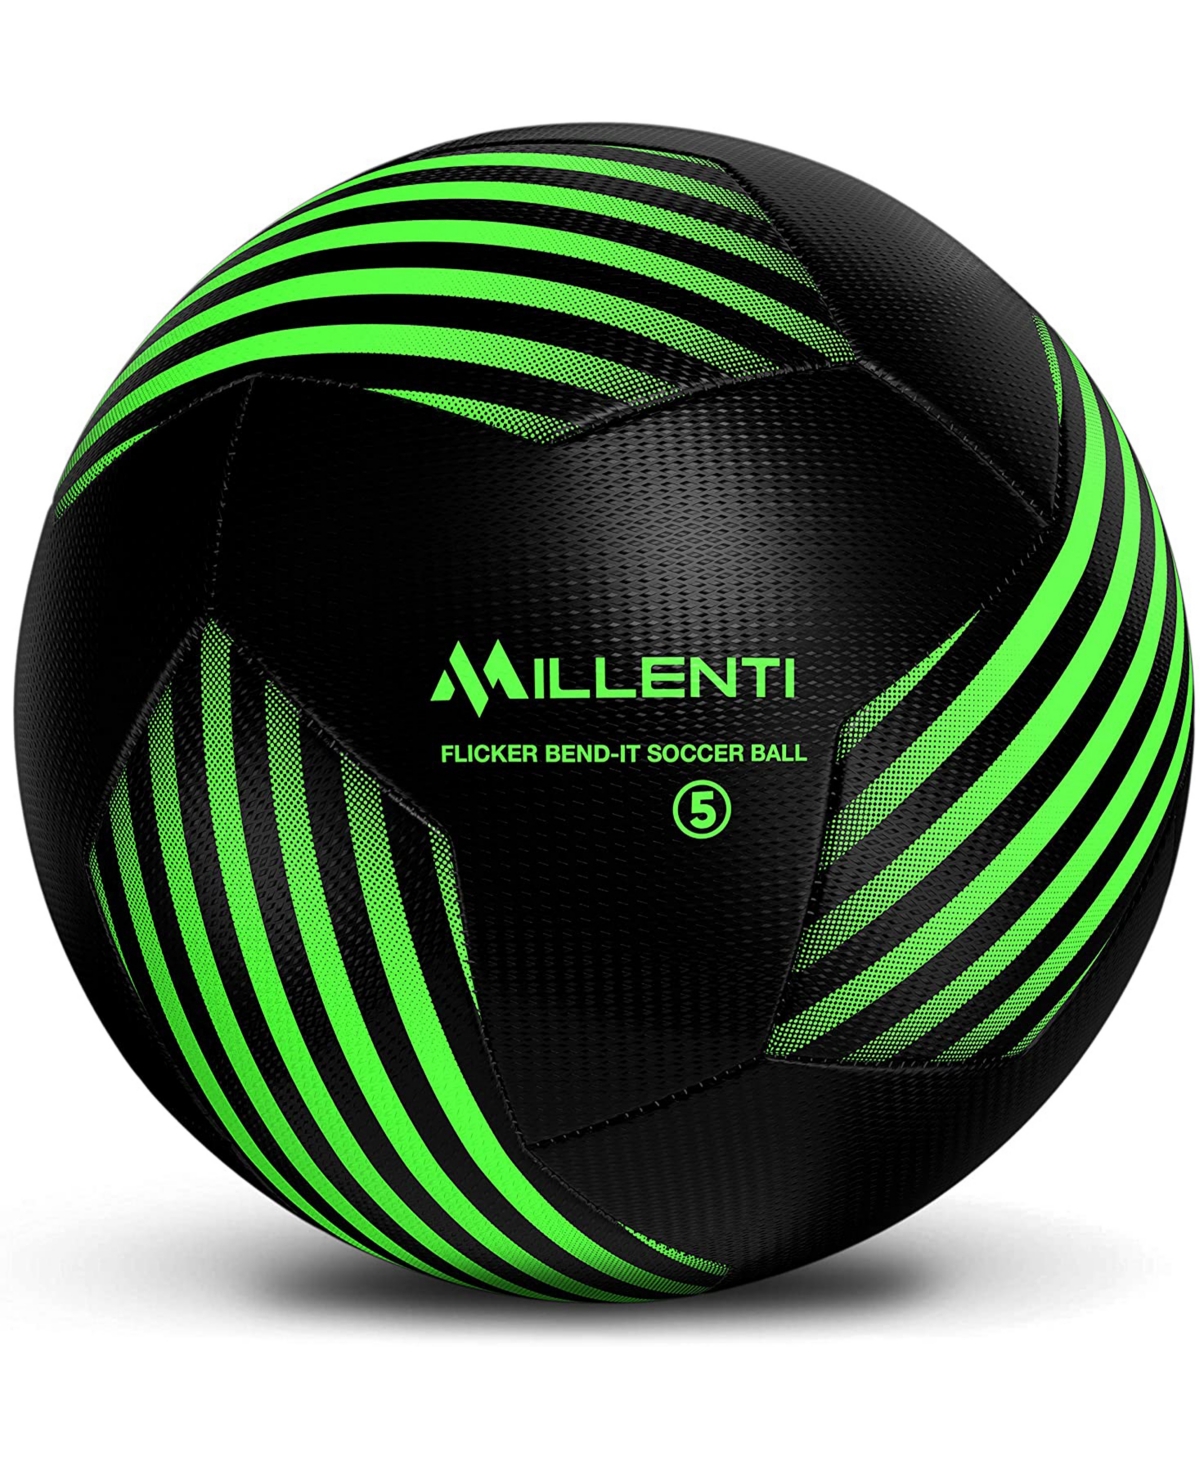 Millenti Us Soccer Ball Official Size 5 - Flicker Bend-it Soccer Ball With High-visibility, Easy-to-track Des In Green